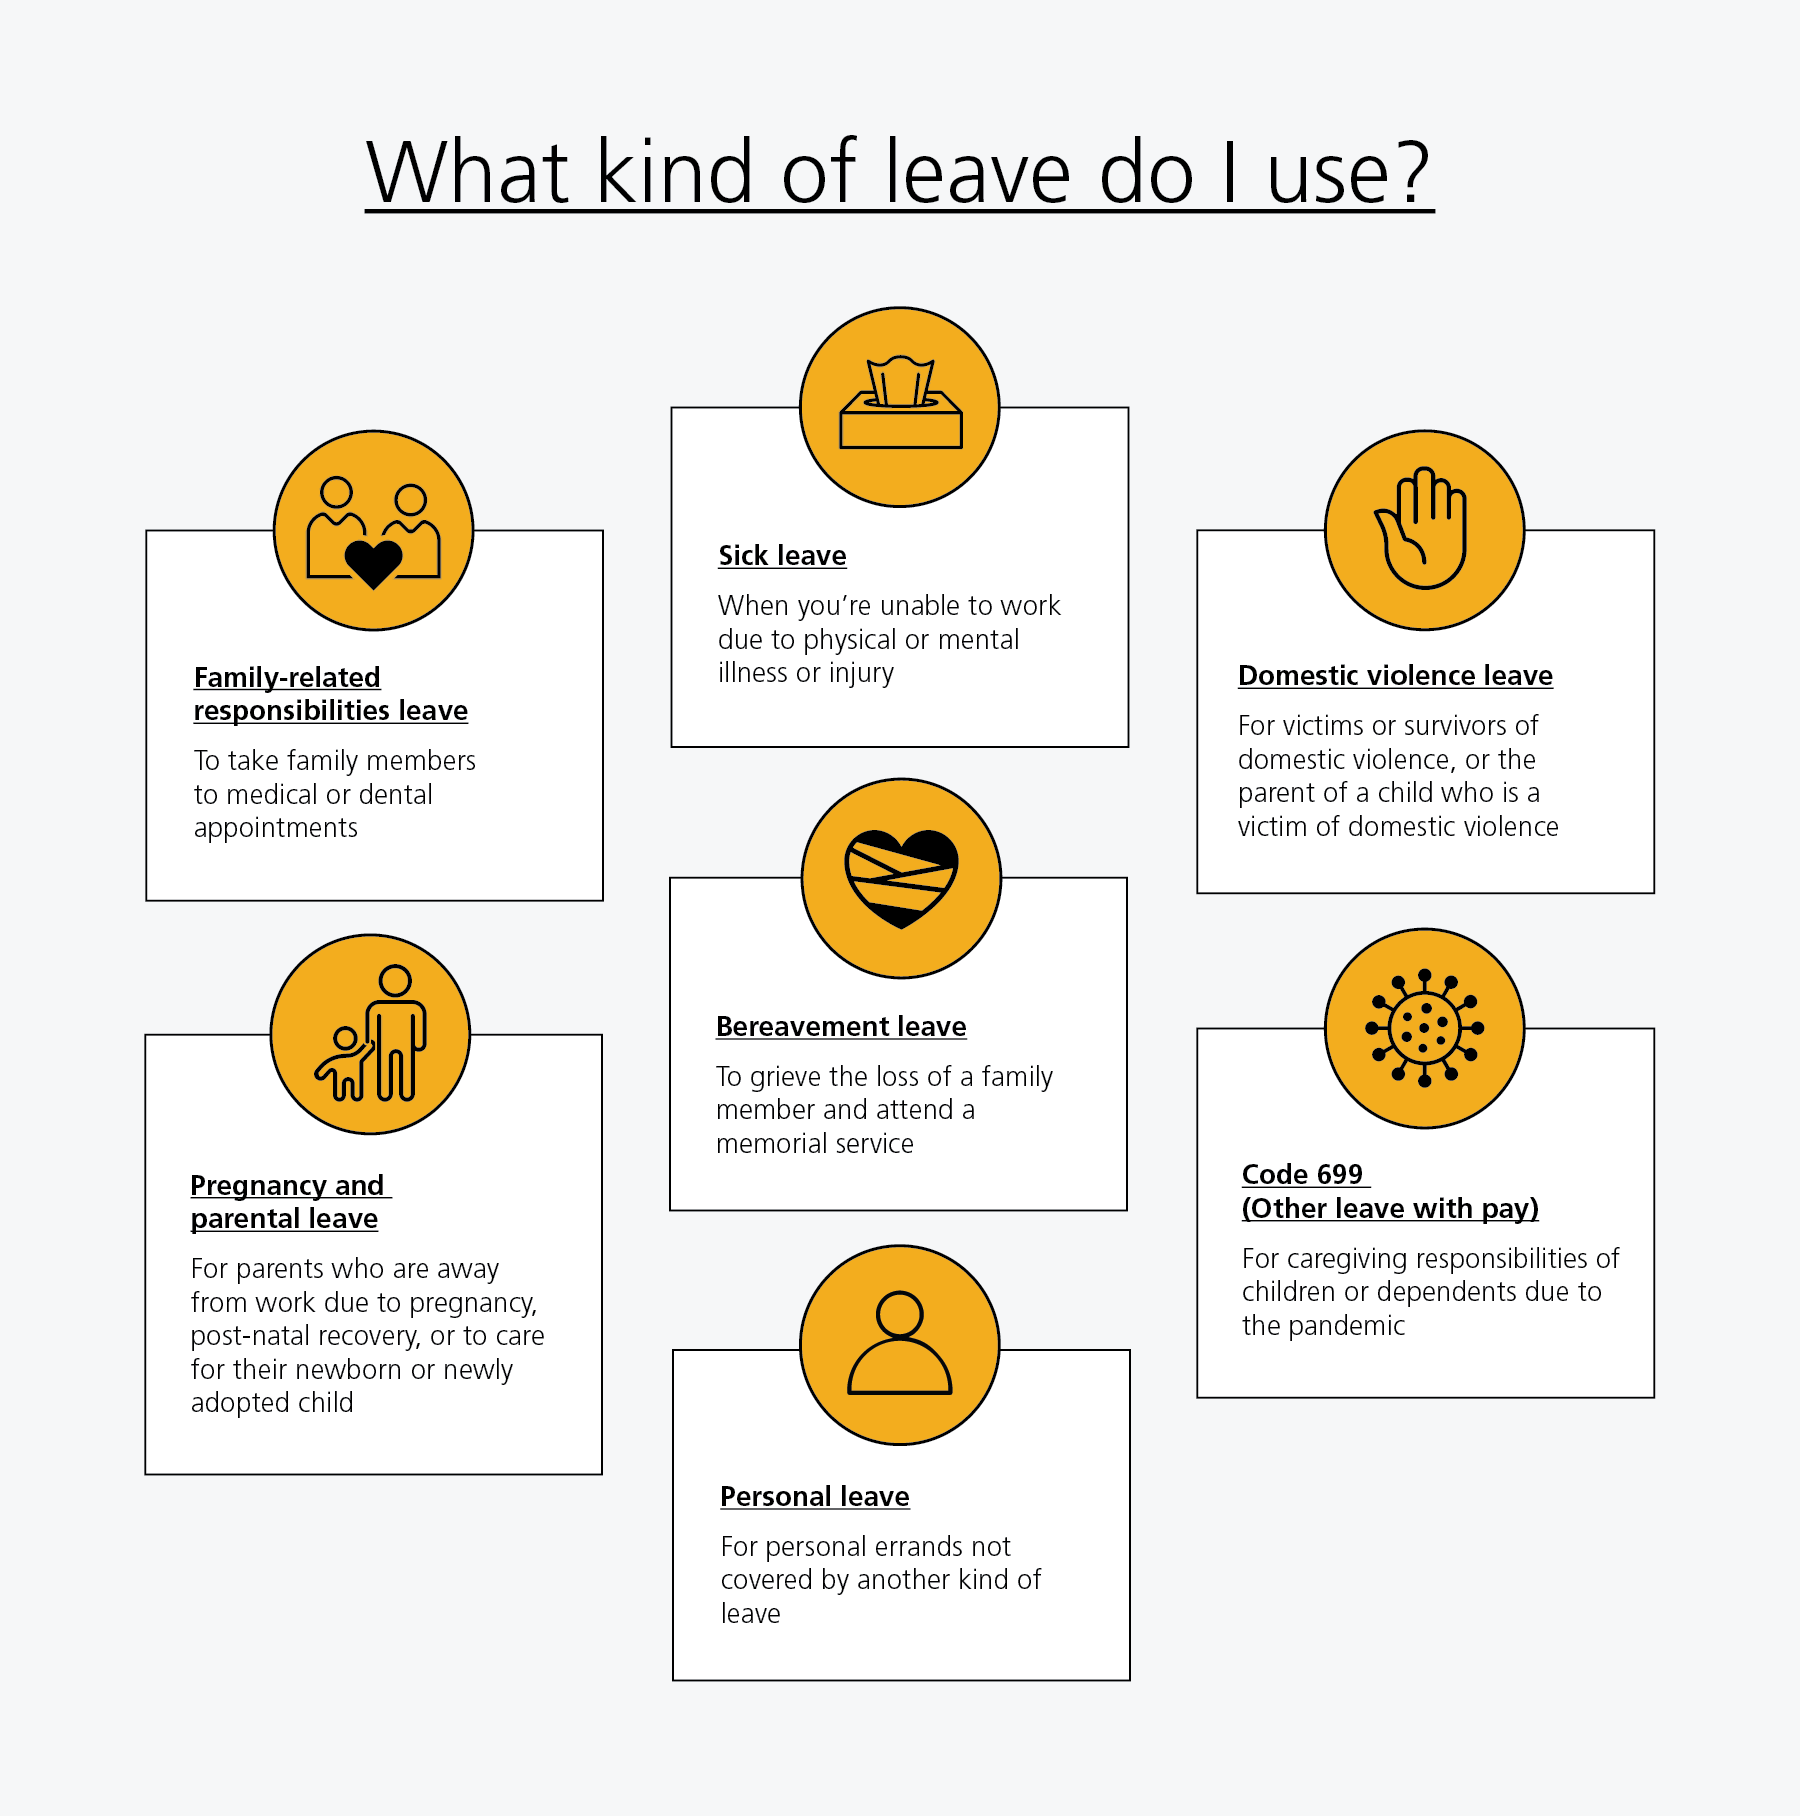 care leave chart. Sick leave: When you’re unable to work due to physical or mental illness or injury. Family-related responsibilities leave: To take family members to medical or dental appointments. Personal leave: For personal errands not covered by another kind of leave. Bereavement leave: To grieve the loss of a family member and attend a memorial service. Code 699 (Other leave with pay: For caregiving responsibilities of children or dependents due to the pandemic. Domestic violence leave: For victims or survivors of domestic violence, or the parent of a child who is a victim of domestic violence. Pregnancy and parental leave: For parents who are away from work due to pregnancy, post-natal recovery, or to care for their newborn or newly adopted child.